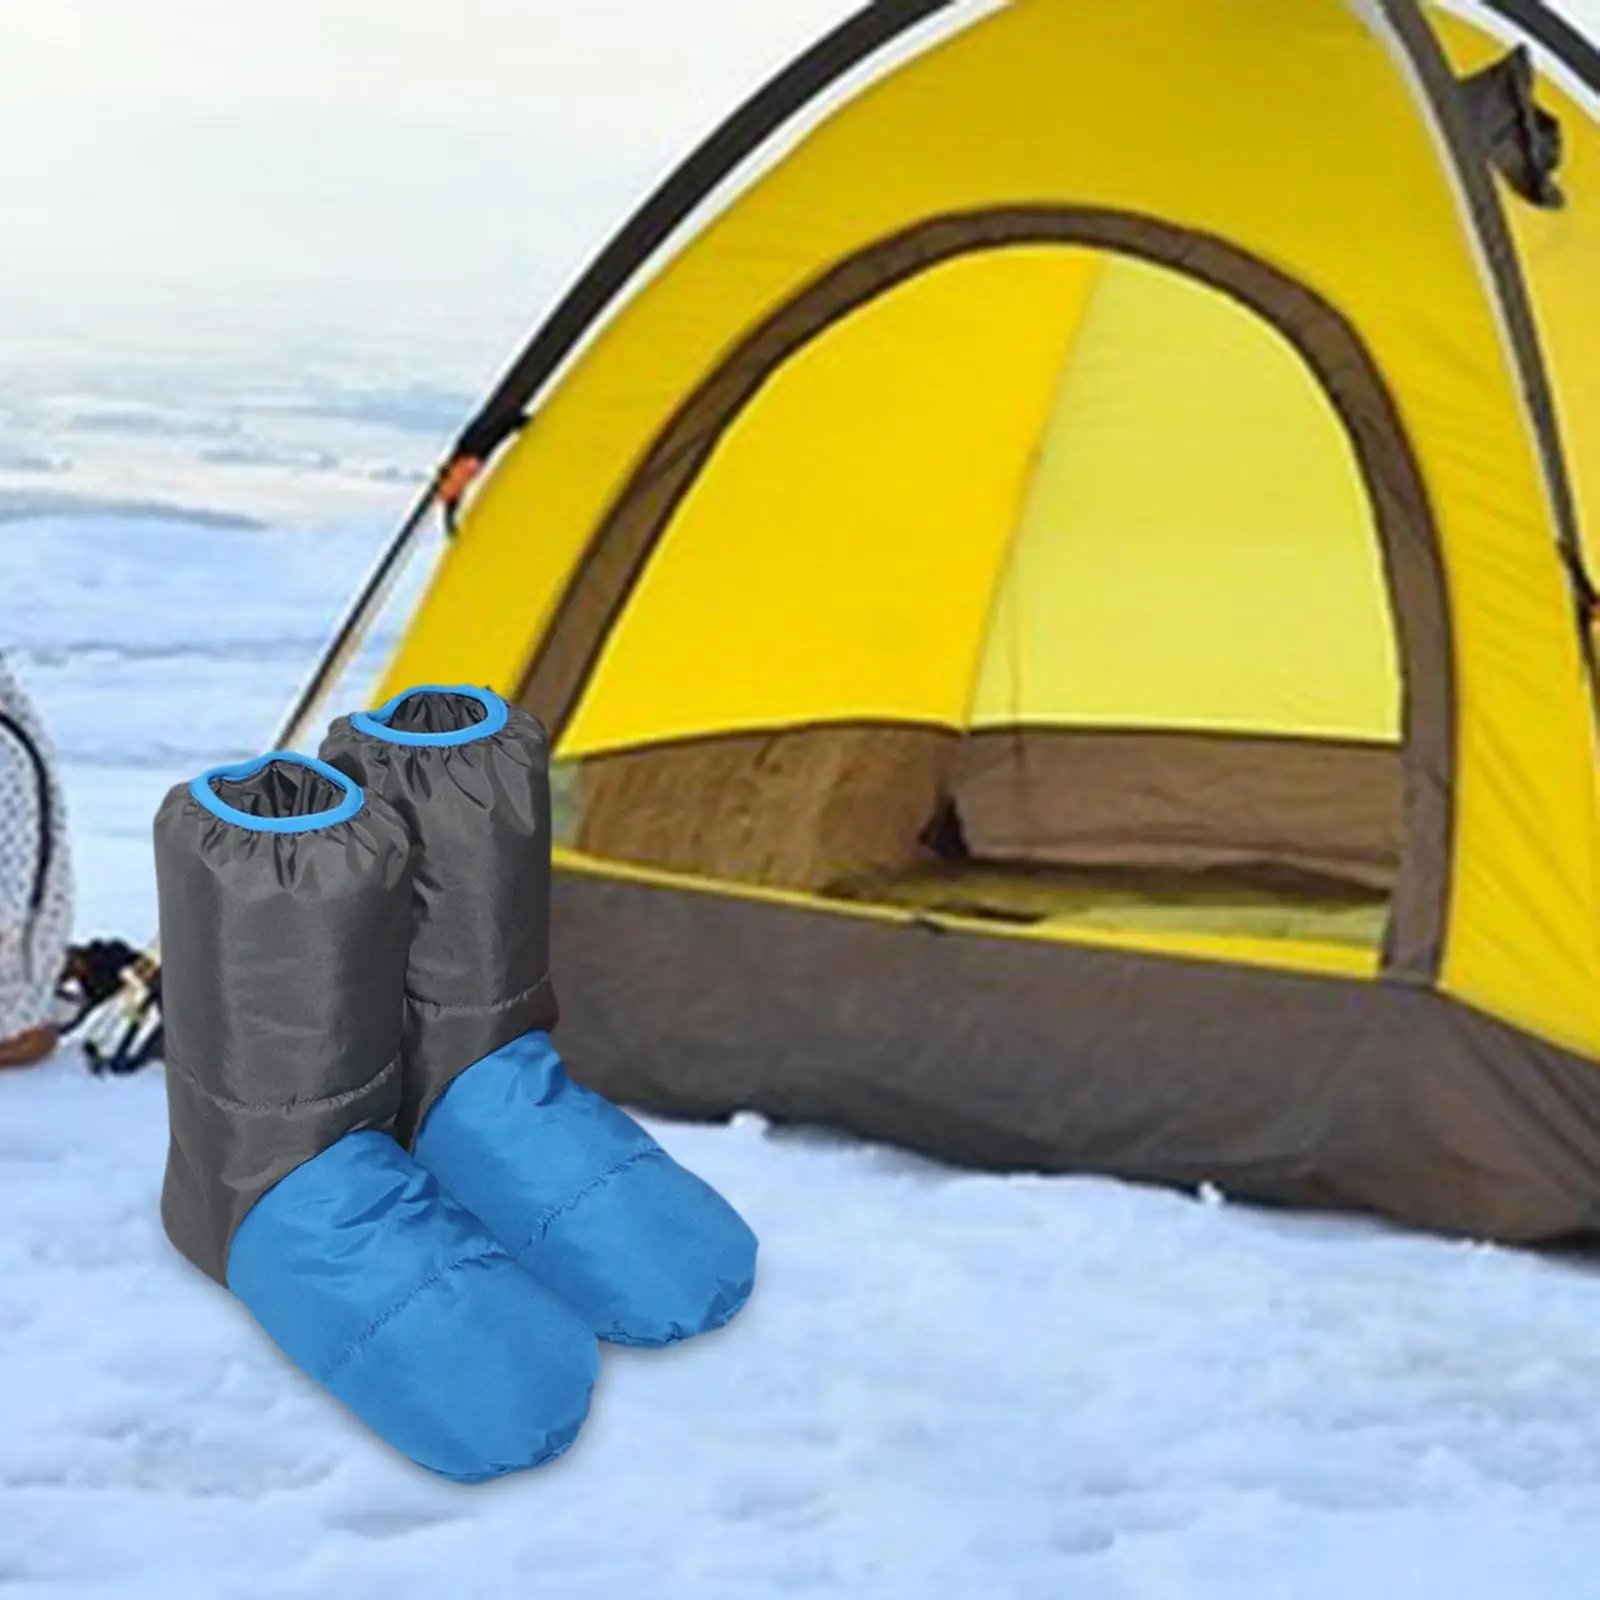 Down Booties Down Shoes Ankle Snow Boots Foot Warmer Cover Windproof Feet Cover Socks Warm Socks for Camping Indoor